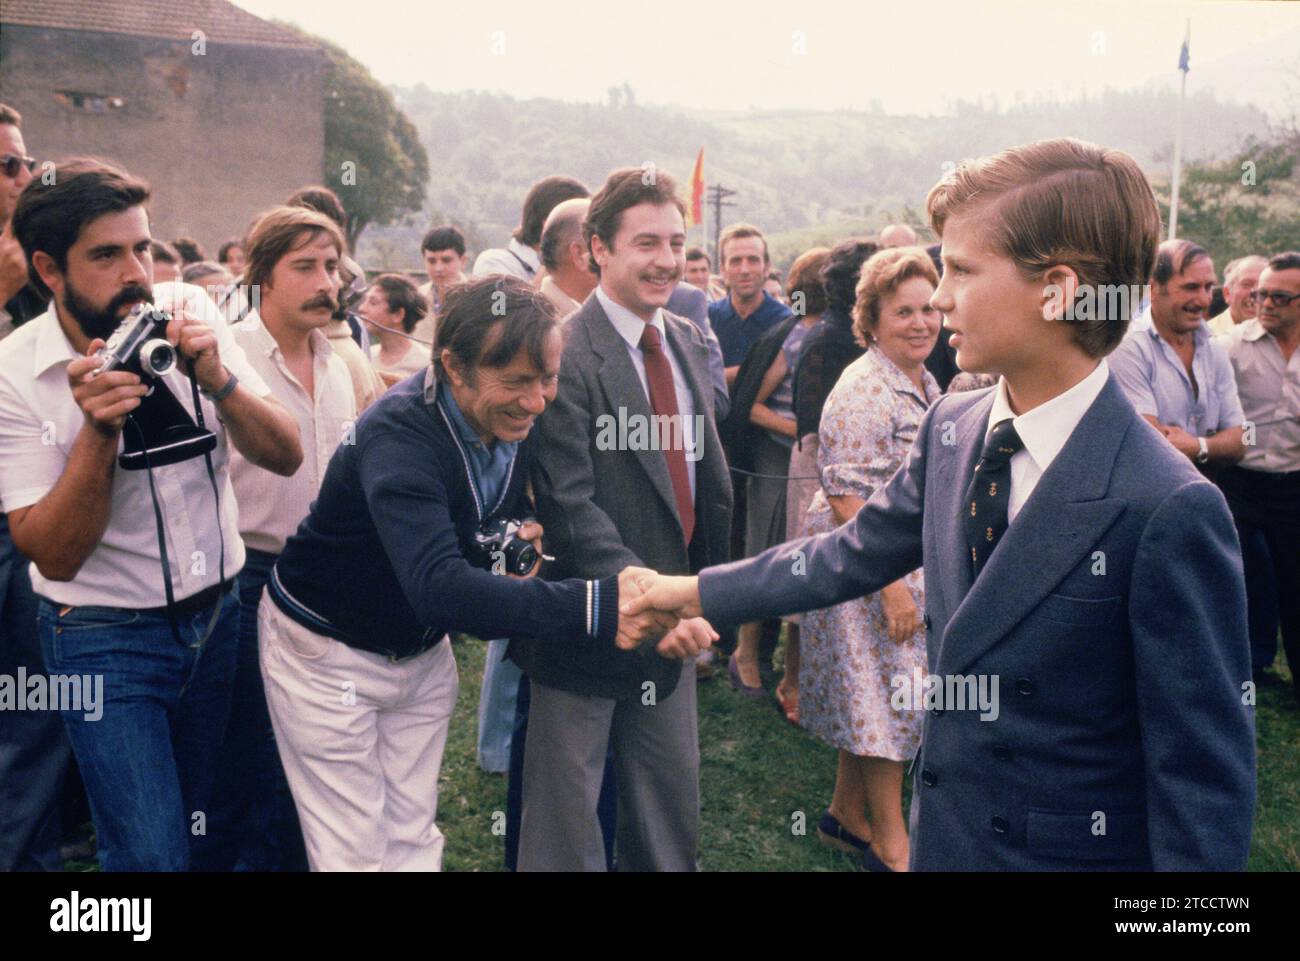 Oviedo, Asturias, September 23, 1980. First official trip of the Prince of Asturias. In the photograph, he is greeted affectionately by the population. Credit: Album / Archivo ABC Stock Photo